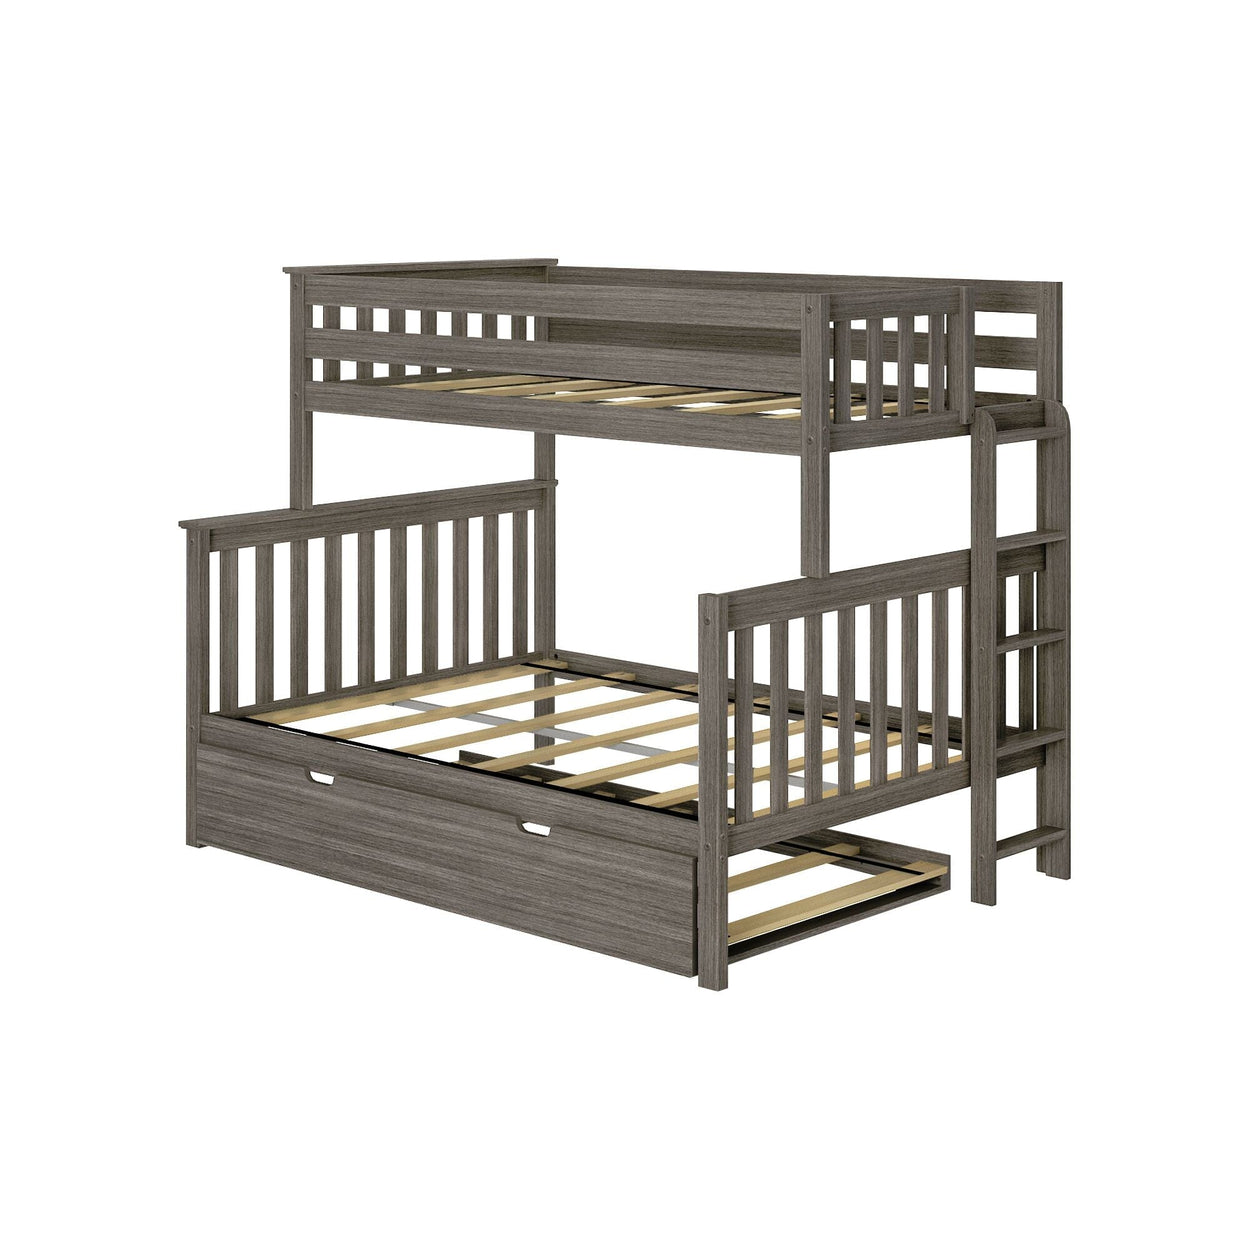 186335-151 : Bunk Beds Twin over Full Bunk Bed with Ladder on End and Trundle, Clay